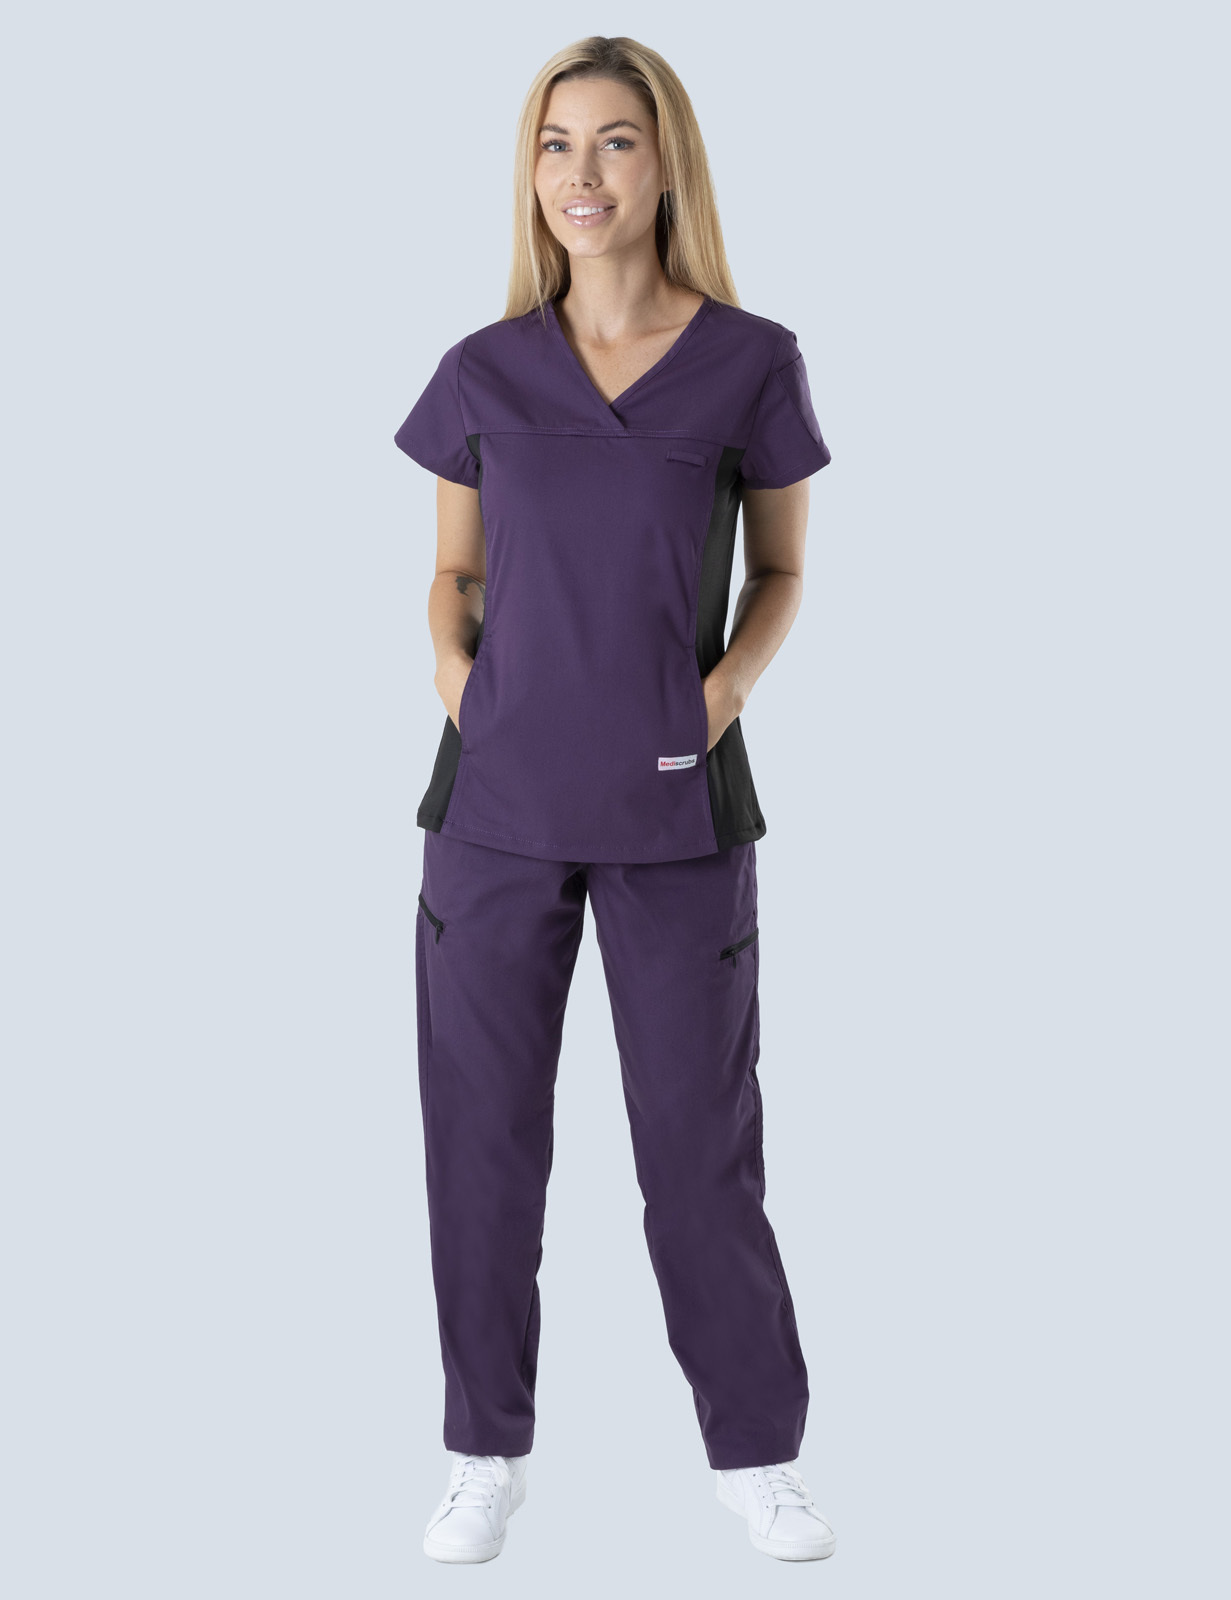 Women's Fit Solid Scrub Top With Spandex Panel - Aubergine - Small